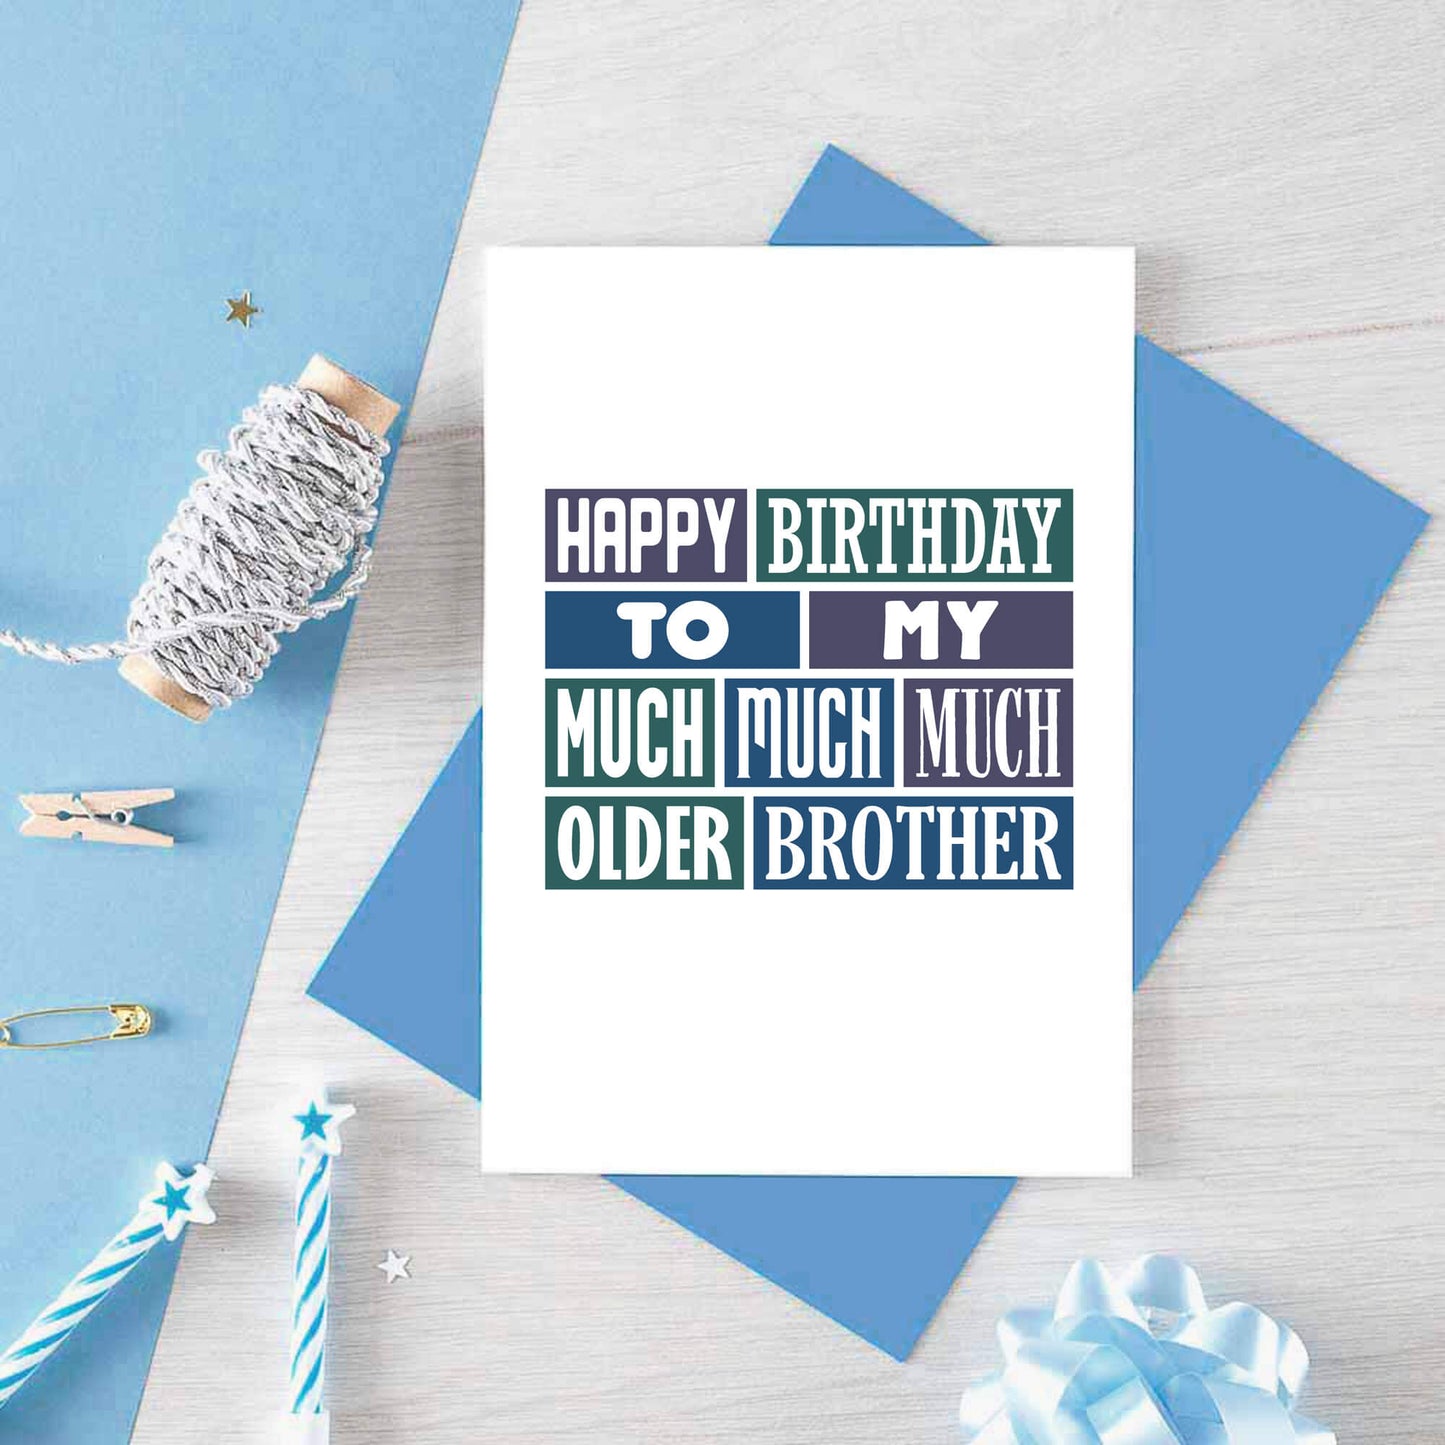 Older Brother Card by SixElevenCreations. Reads Happy birthday to my much much much older brother. Product Code SE0258A6